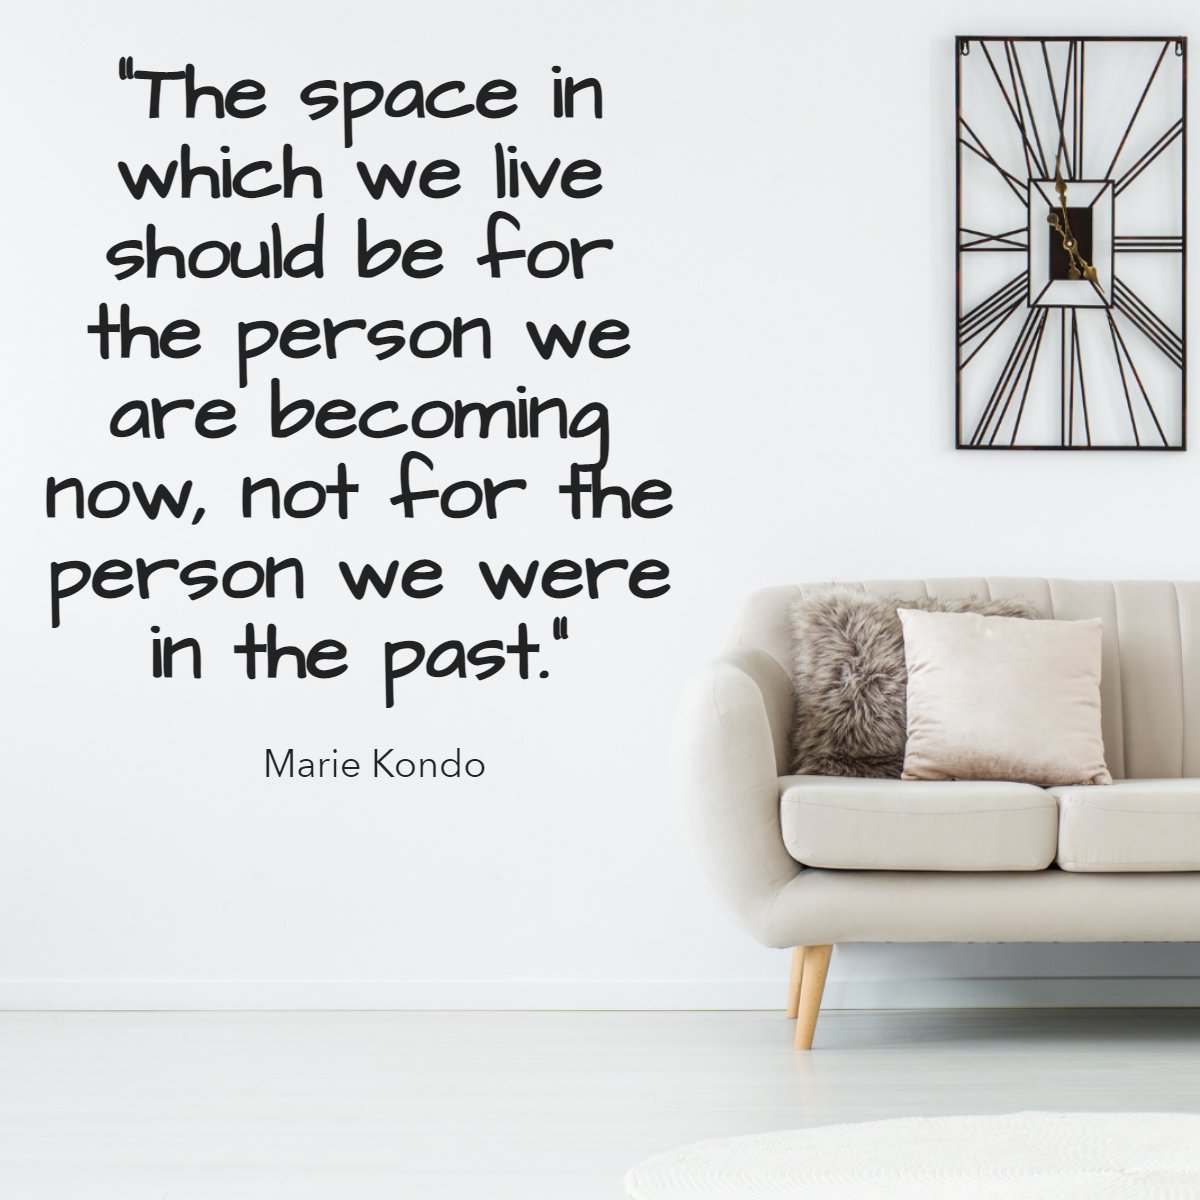 'The space in which we live should be for the person we are becoming now, not for the person we were in the past.' 
― Marie Kondo 📖

#space #realestate #room #buy #sell #property #home #house #quoteoftheday #mariekondo #quotes